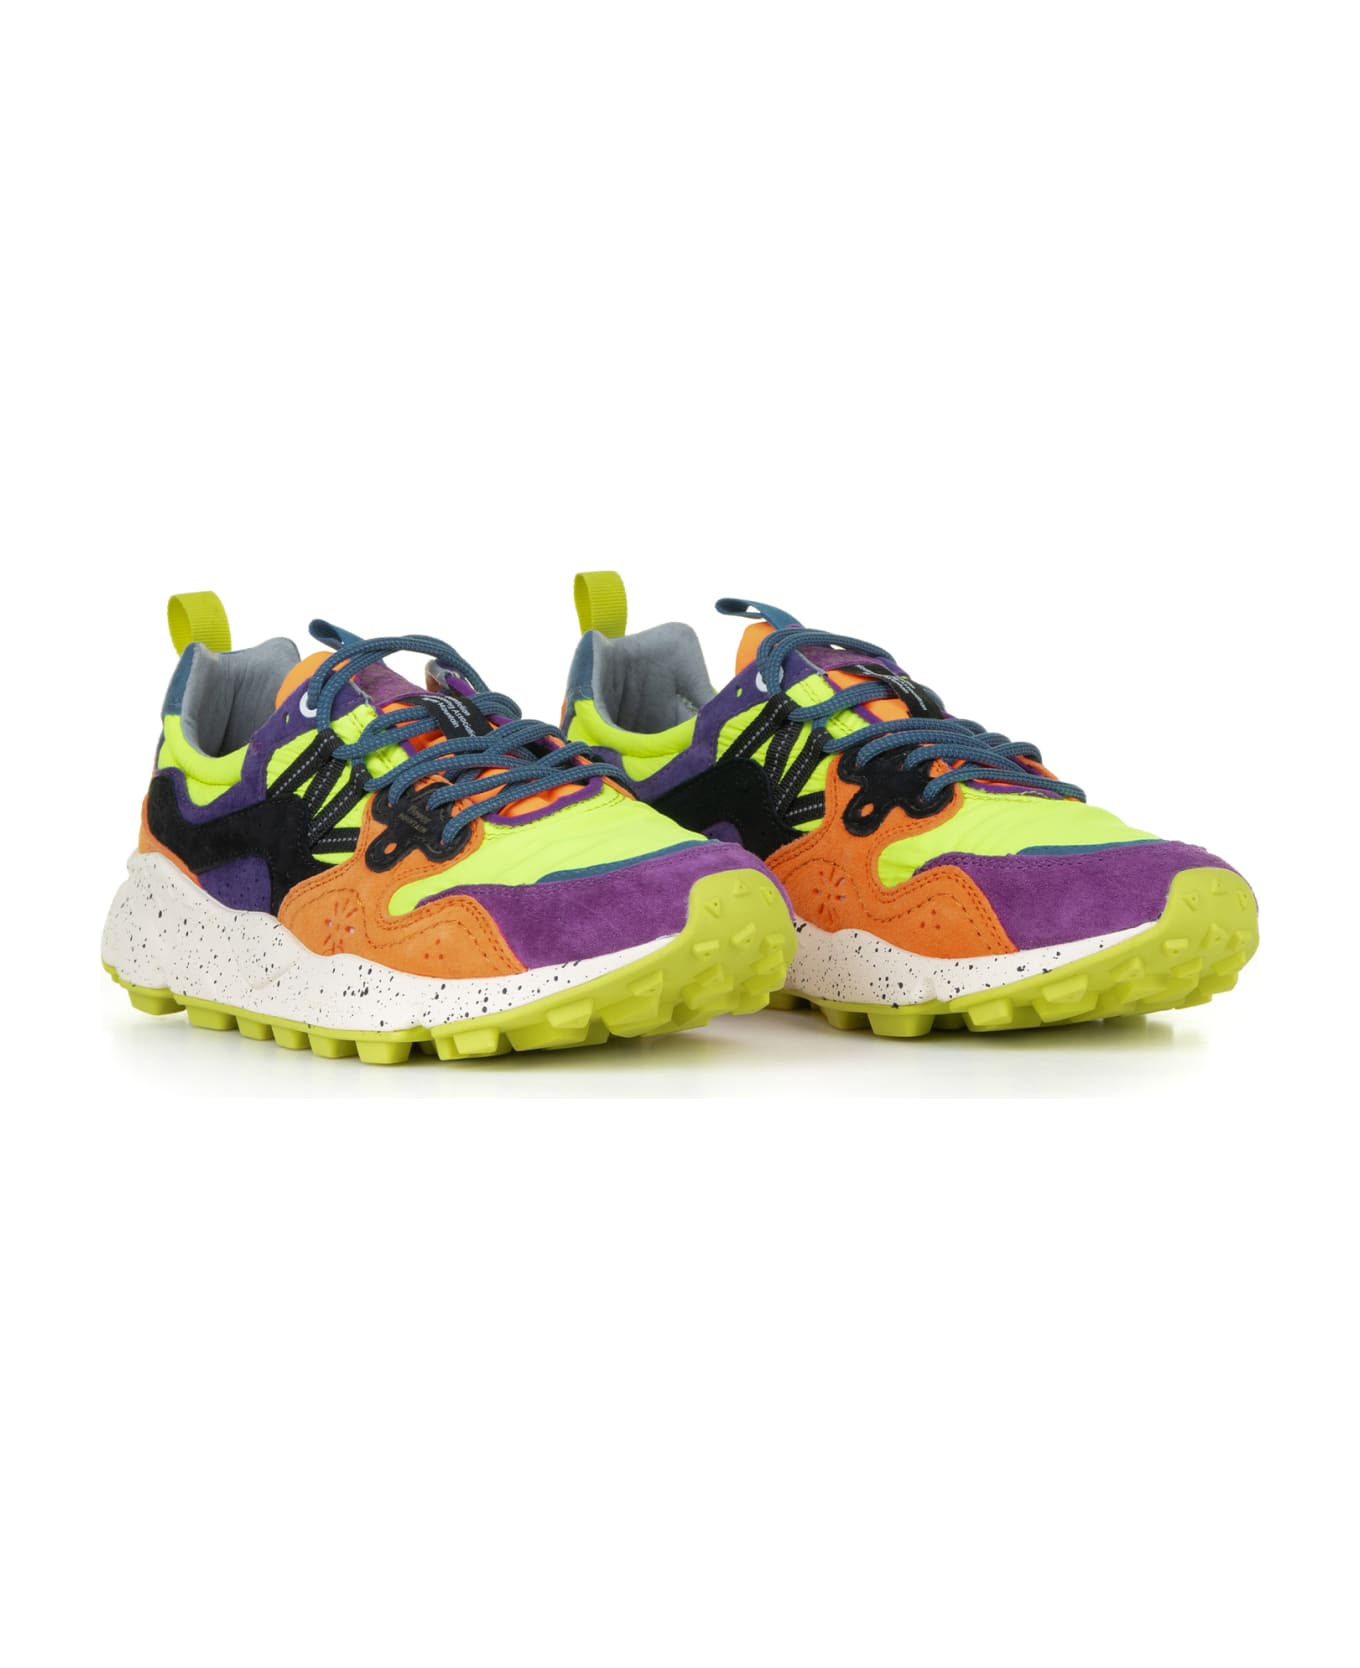 Flower Mountain Multicolored Yamano Sneakers - OCRA VIOLET